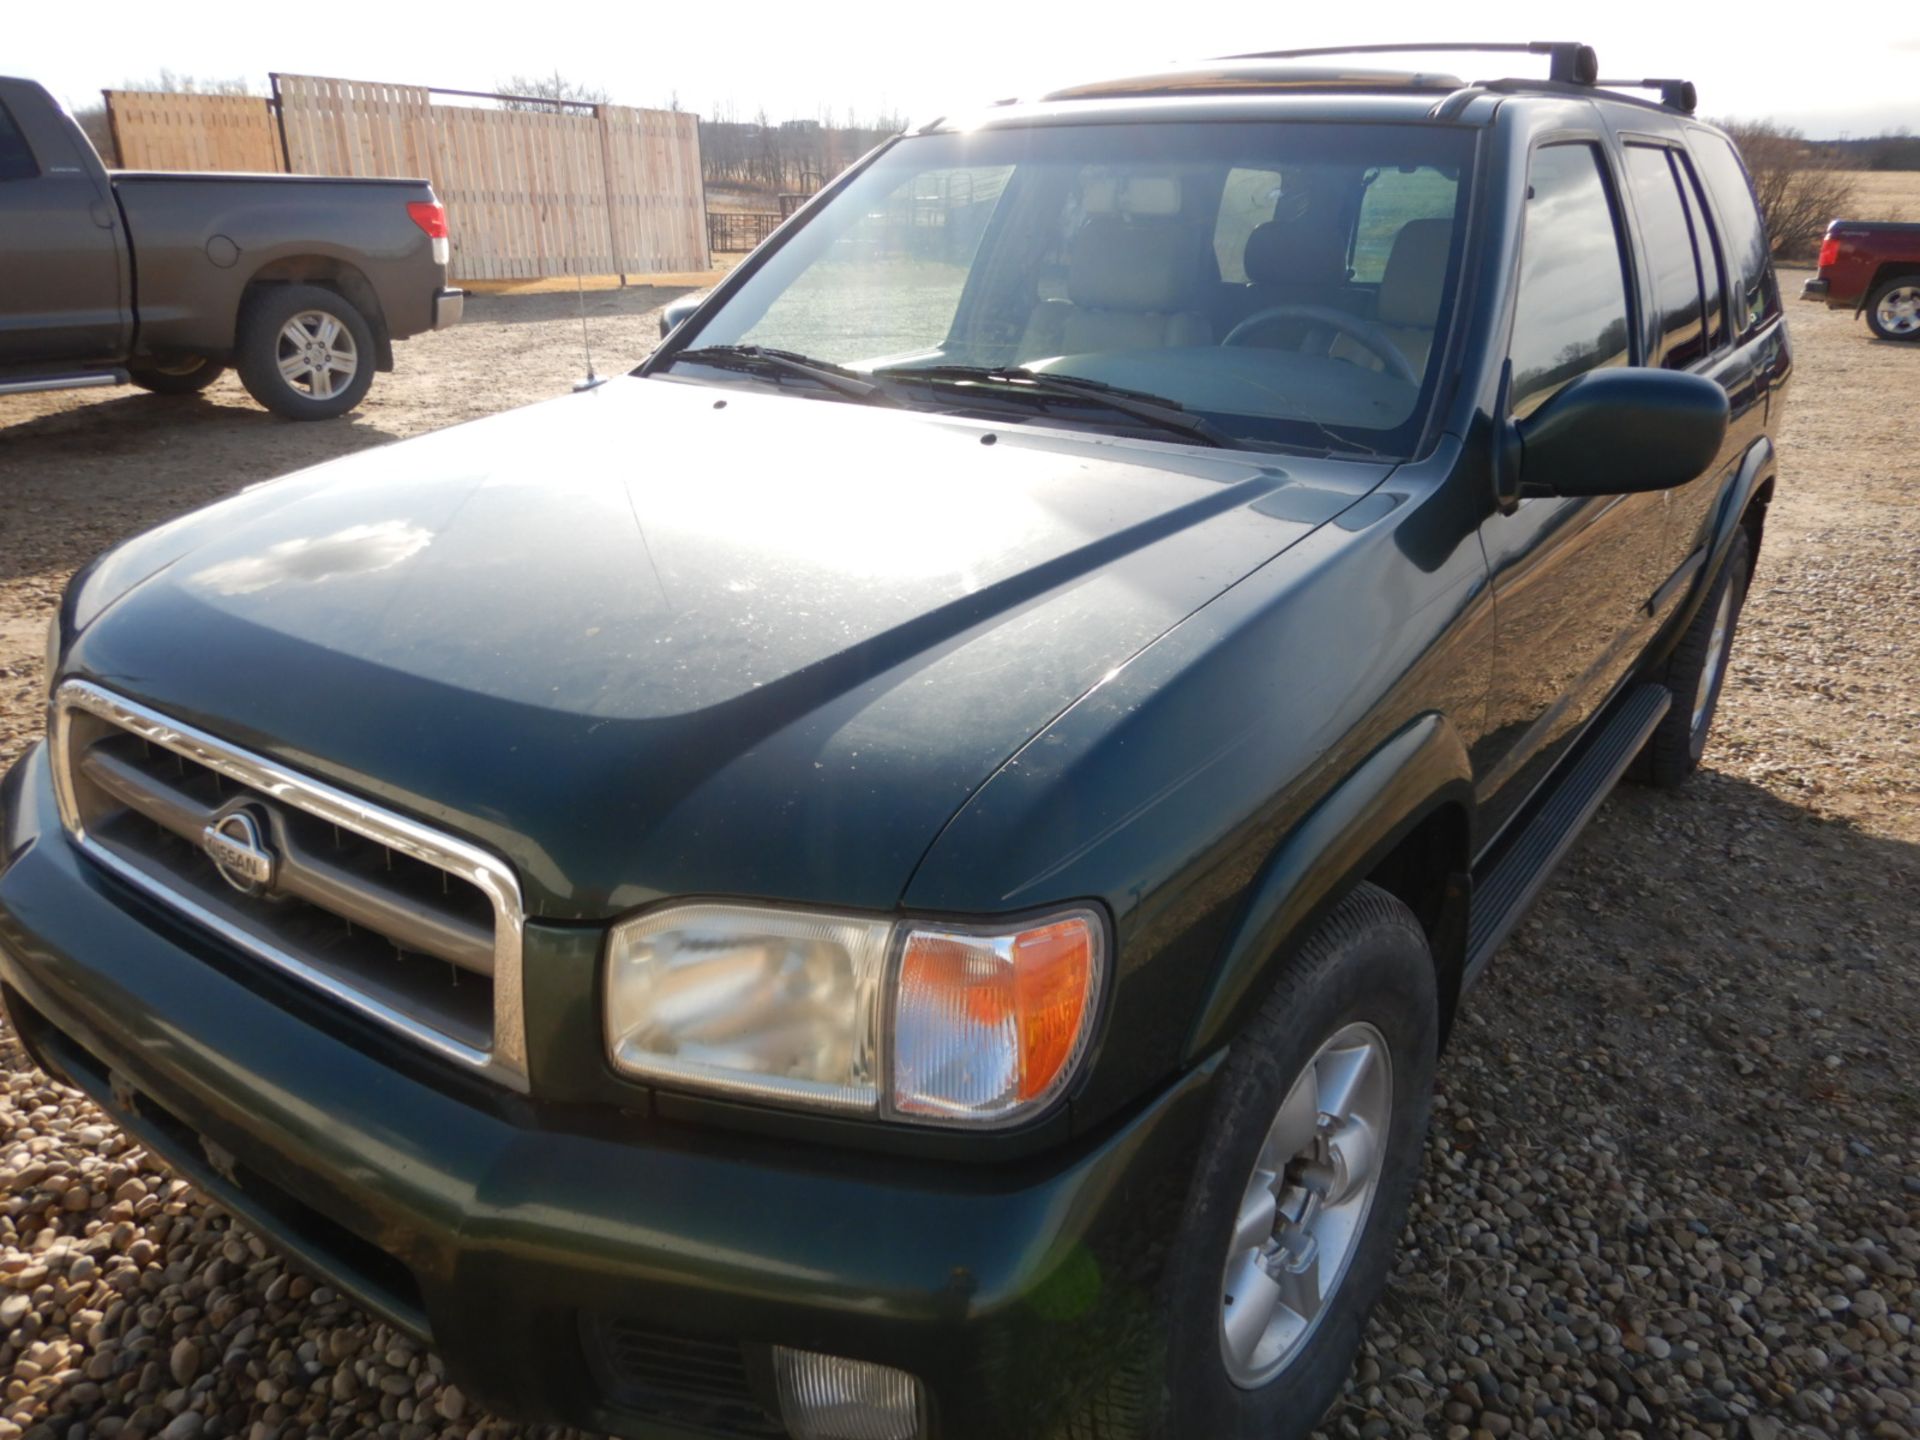 2000 NISSAN PATHFINDER, 2WD, 4DR, CLOTH INTERIOR, 174,215 MILES SHOWING - S/N JN8DR07X01N512600